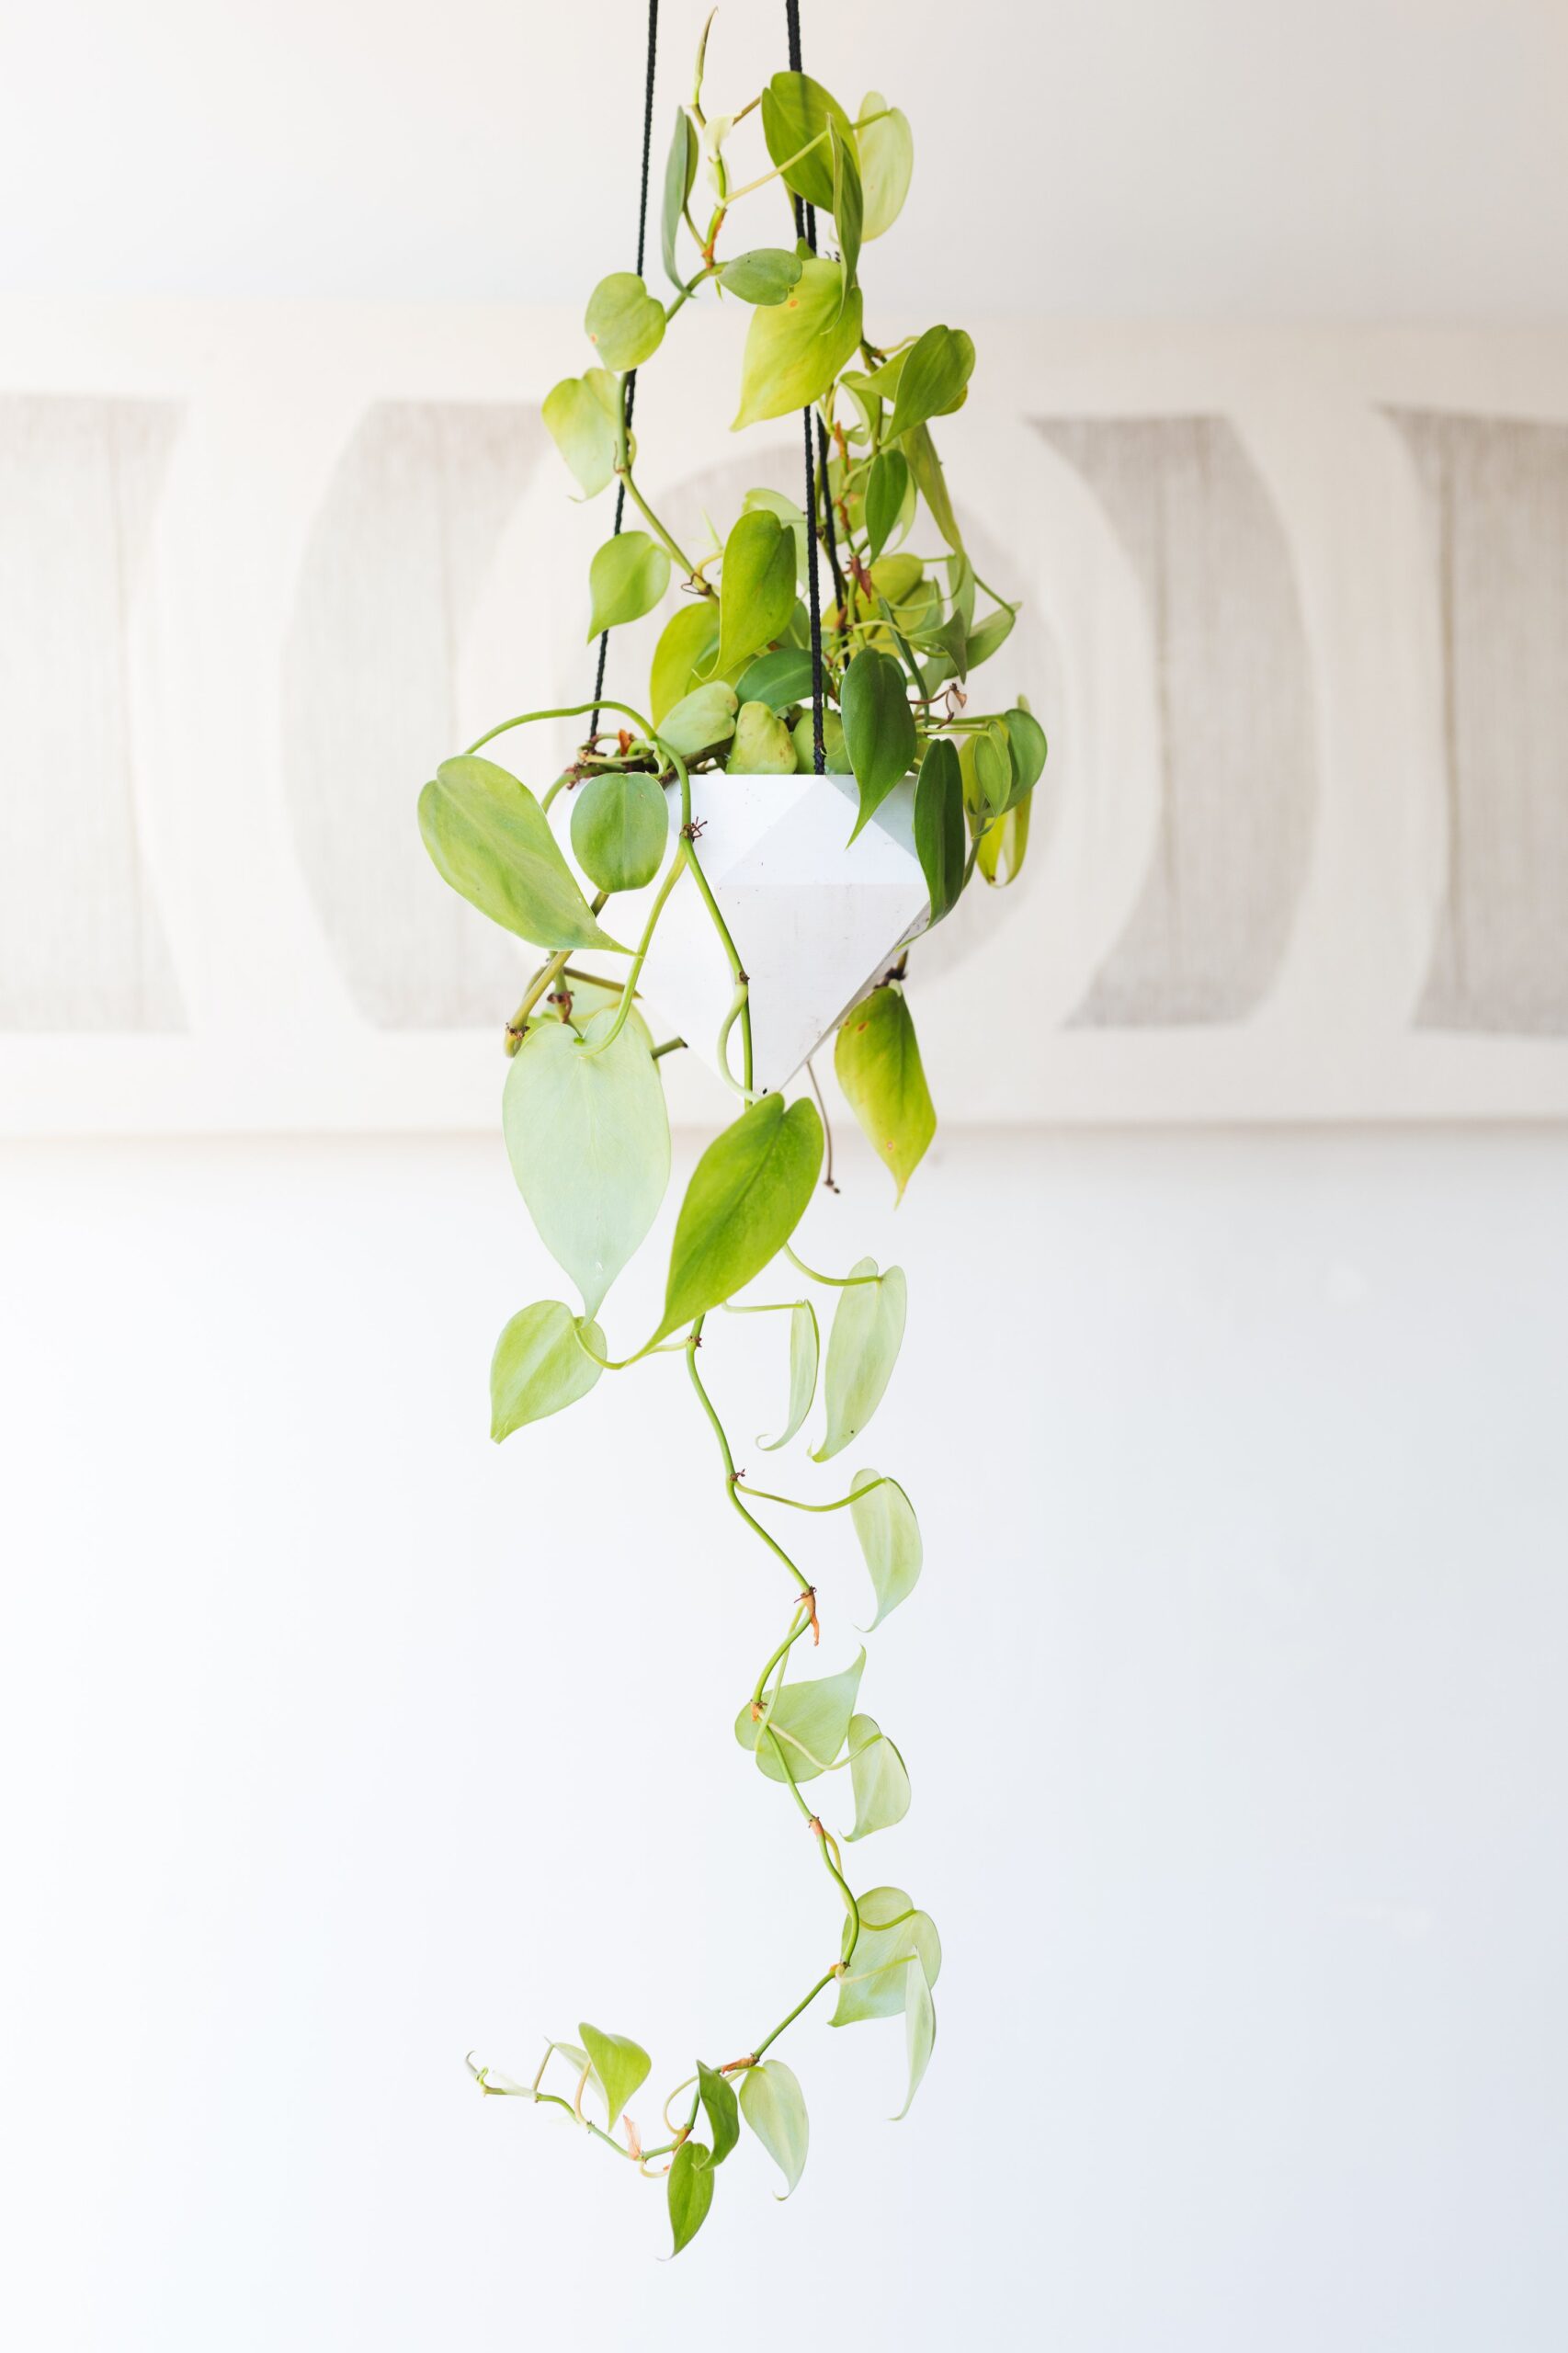 Devil's ivy is ideal for homes with not a lot of natural light